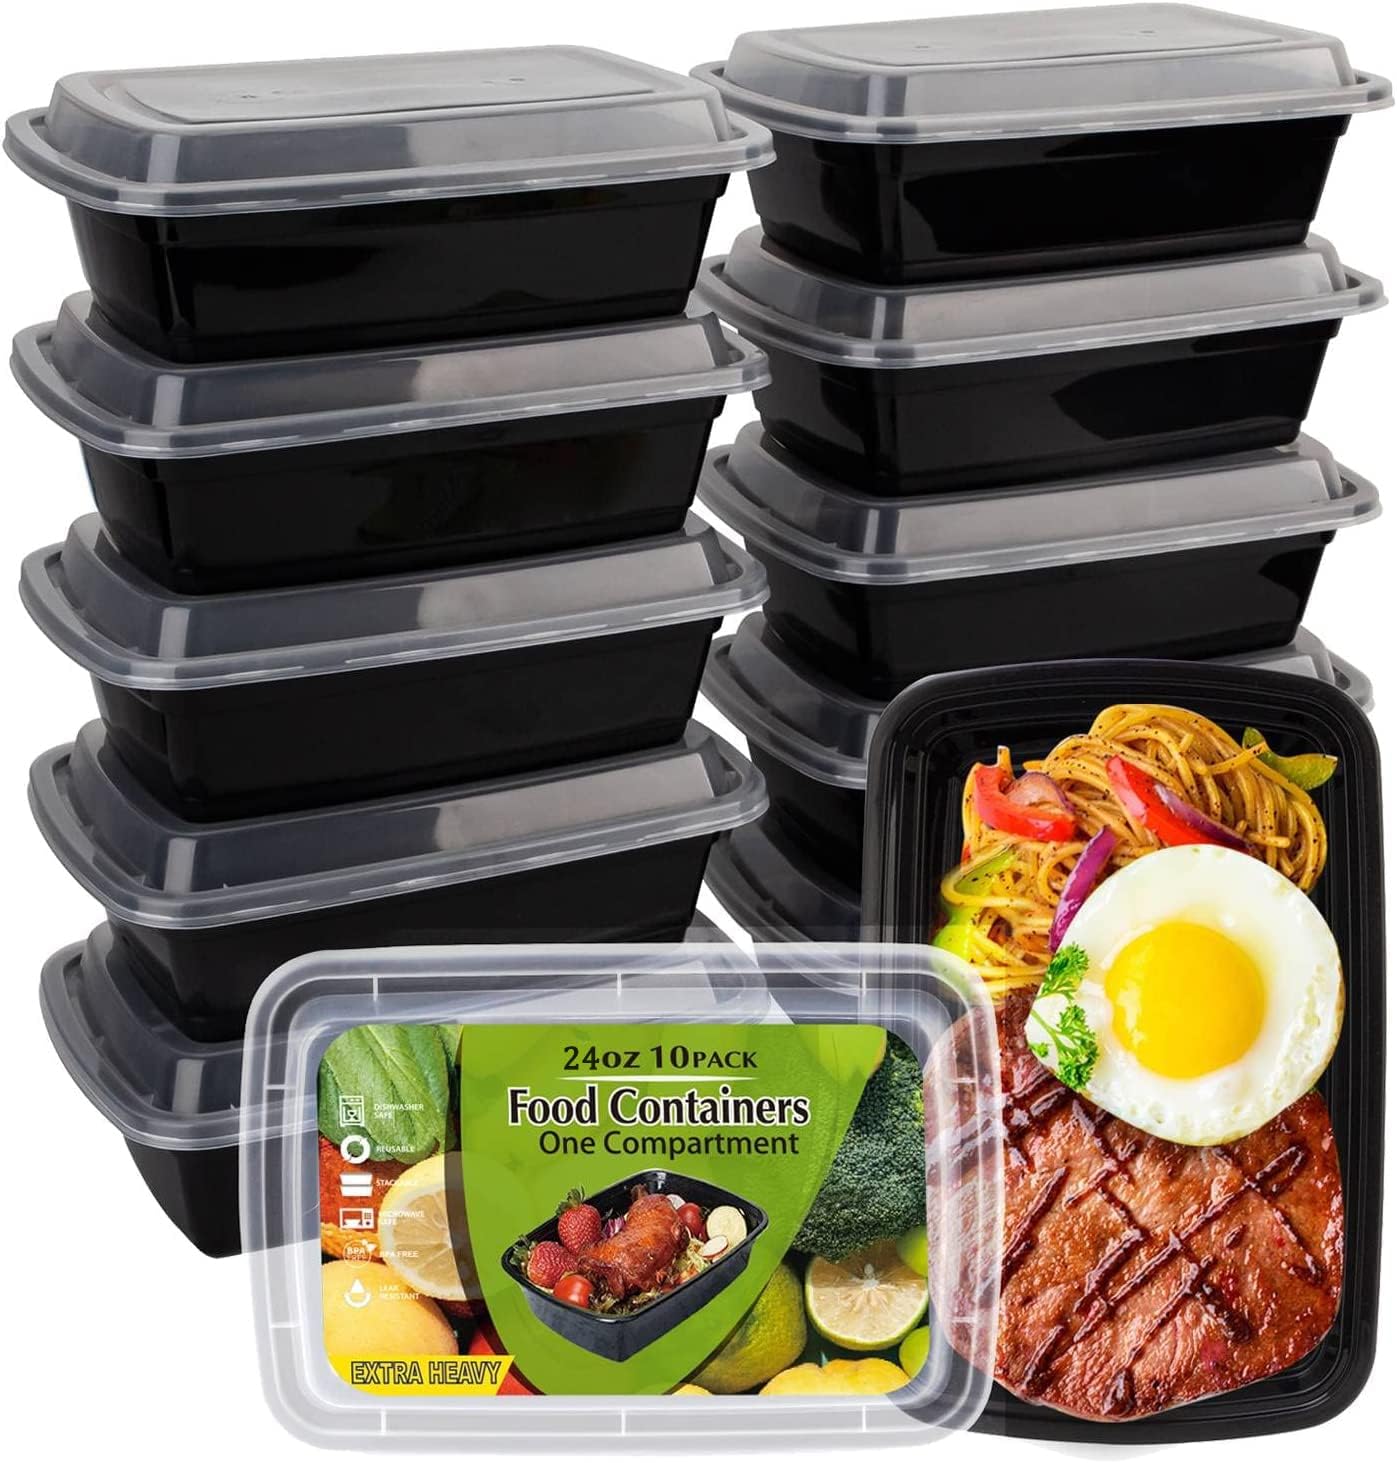 WGCC Meal Prep Containers, Food Storage Containers with Lids, To Go Containers, BPA Free, Stackable, 24oz, Microwave/Dishwasher/Freezer Safe 24OZ-10Pack - Save Big on Your Purchase!